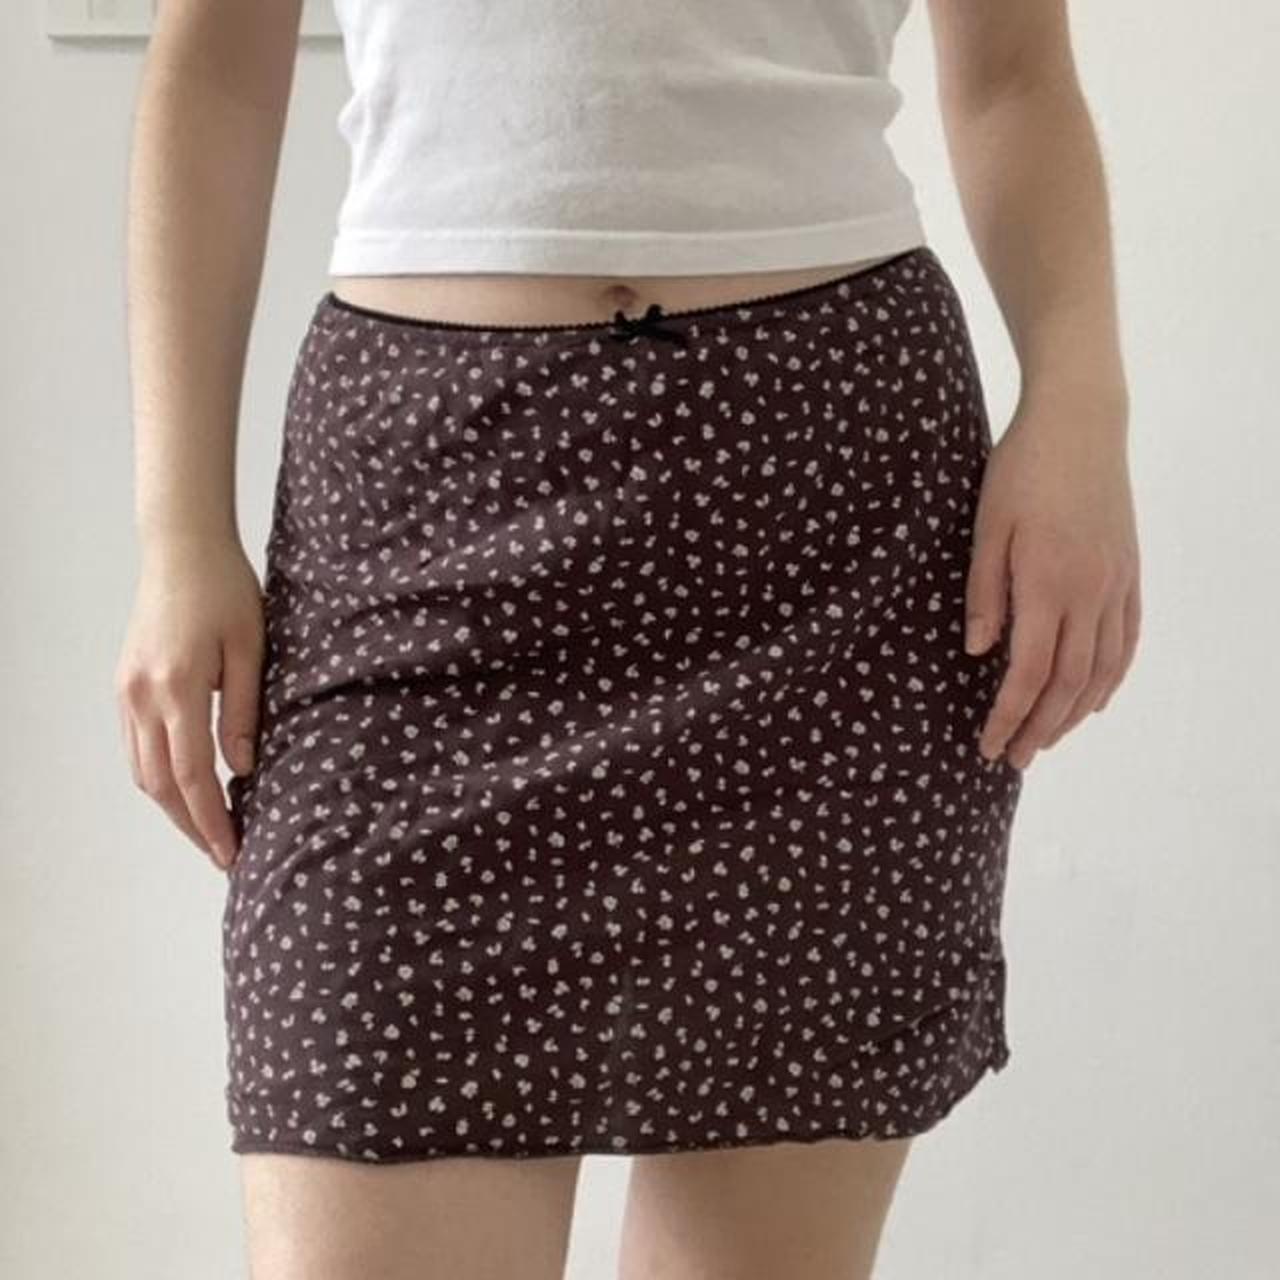 The beautiful brown floral mini skirt with an...